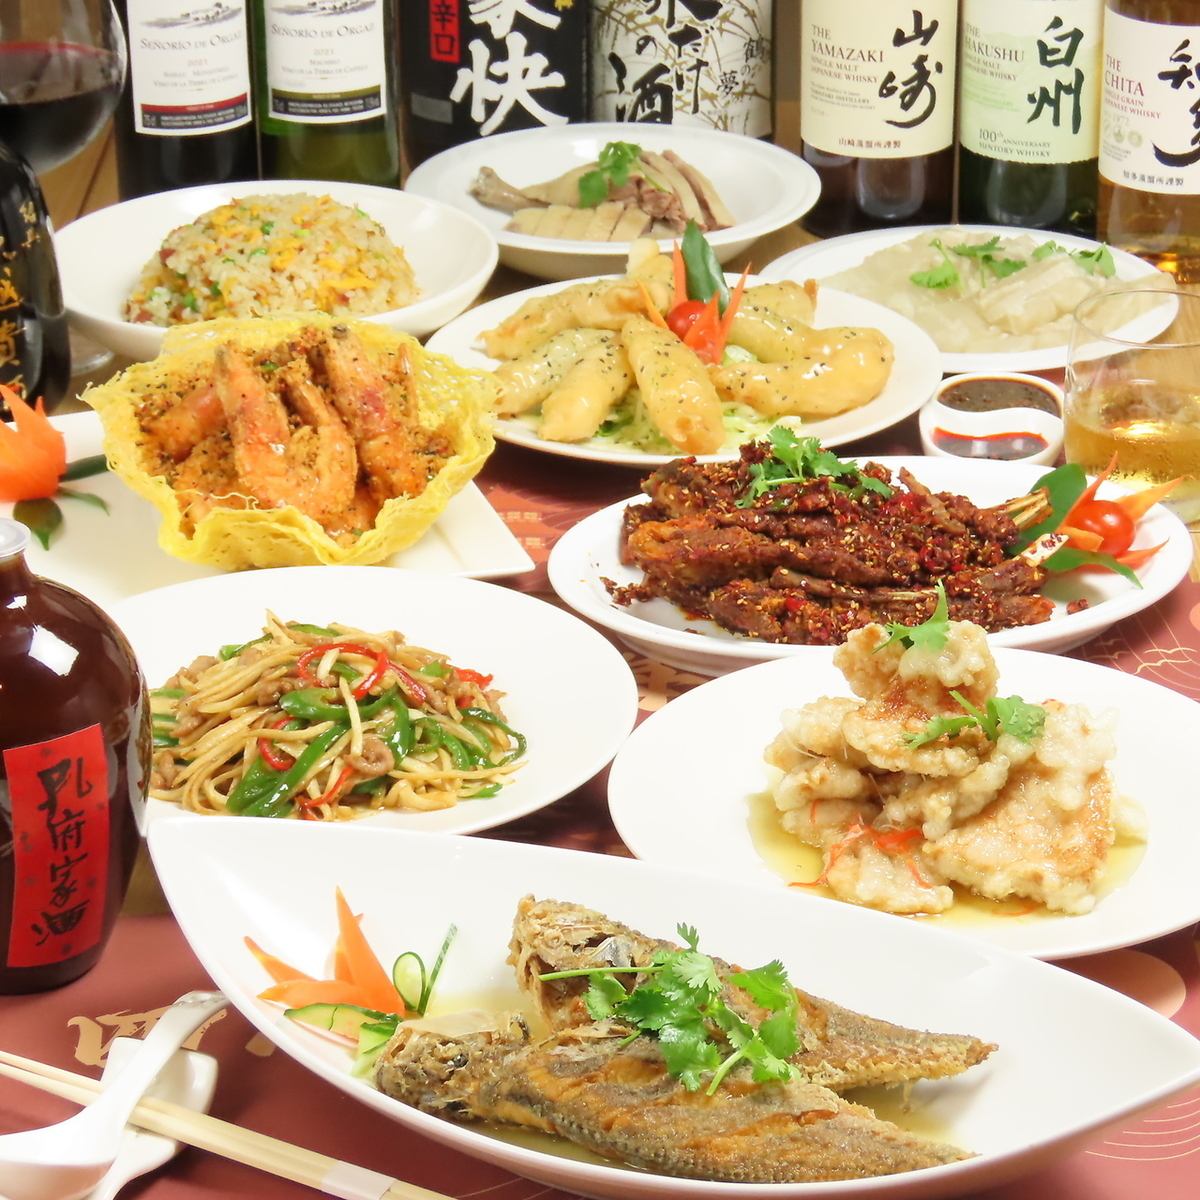 We are particular about fresh ingredients and offer truly delicious creative Chinese food...